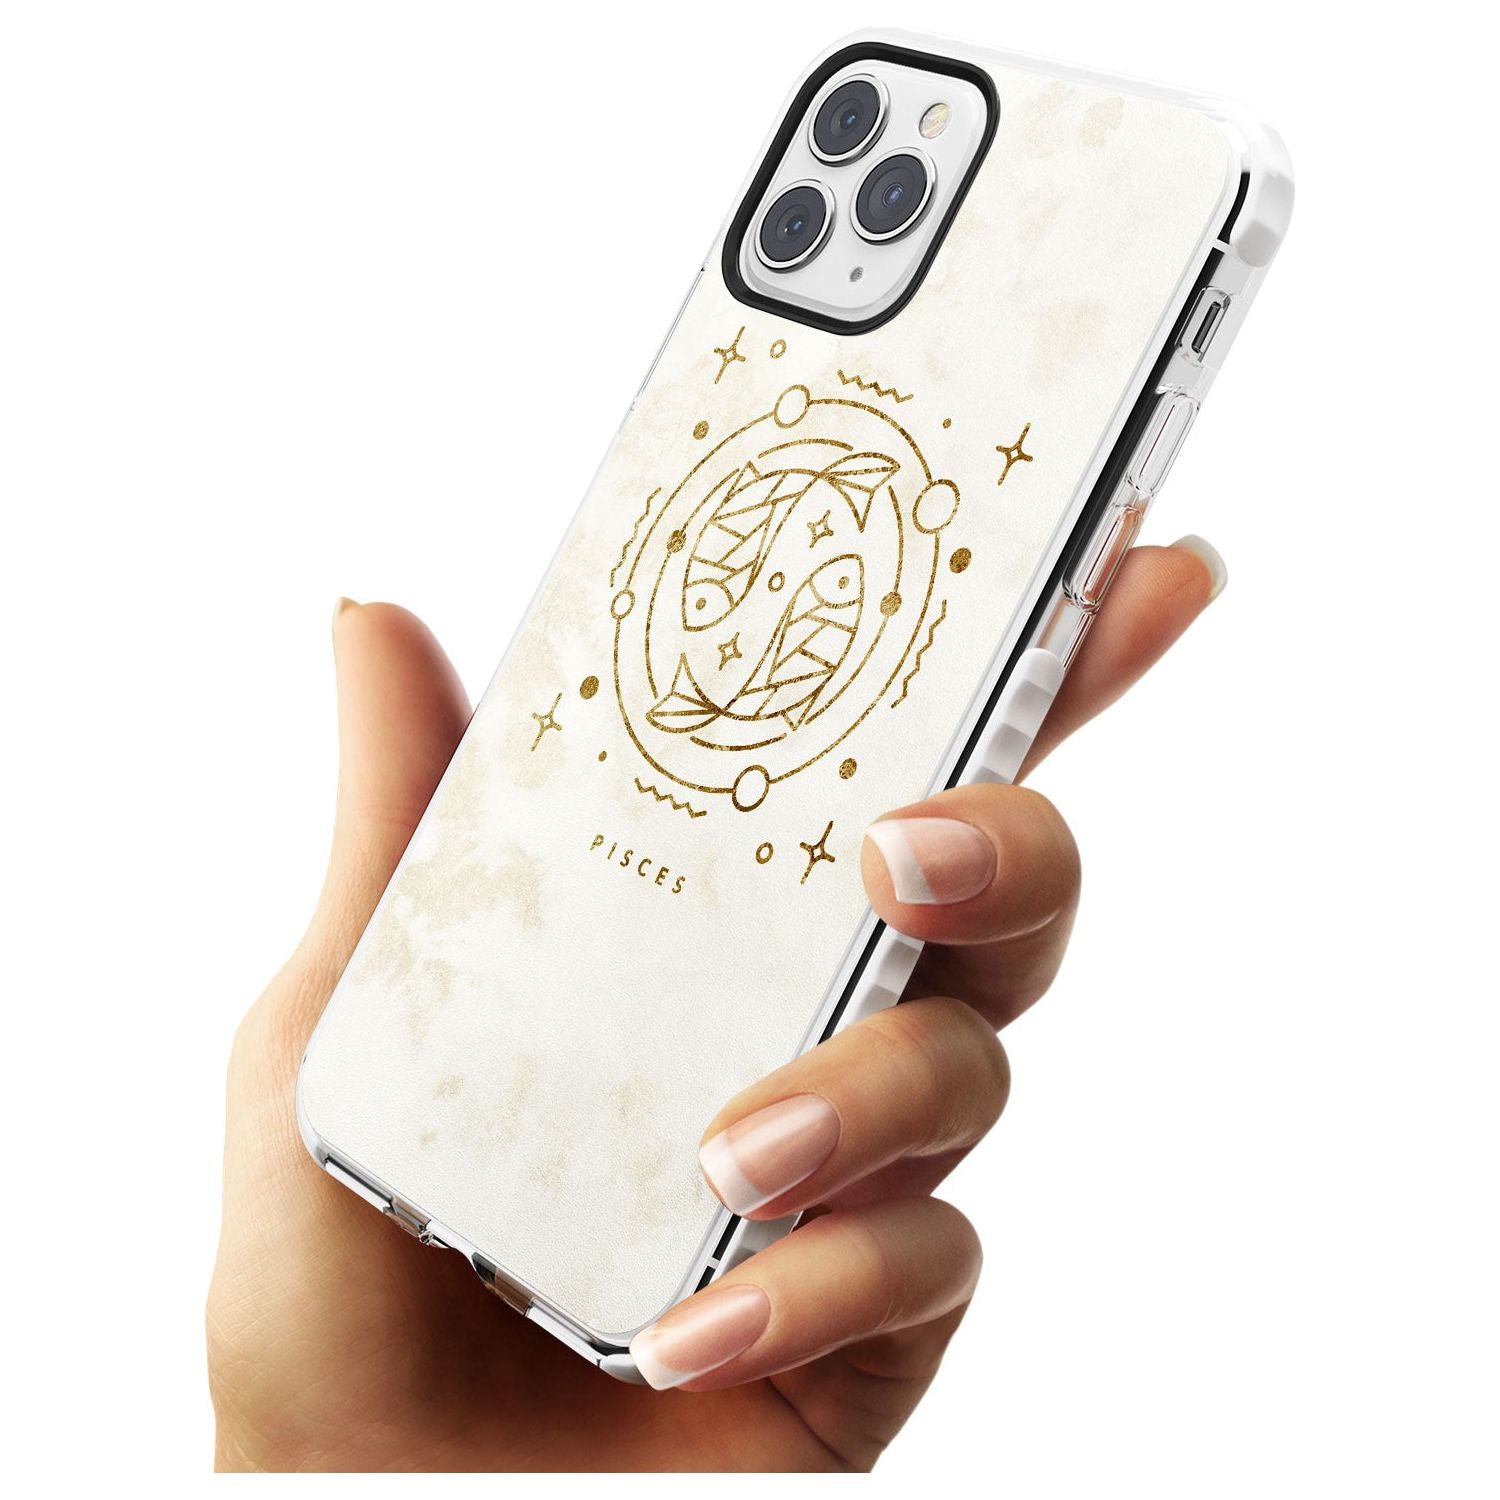 Pisces Emblem - Solid Gold Marbled Design Impact Phone Case for iPhone 11 Pro Max